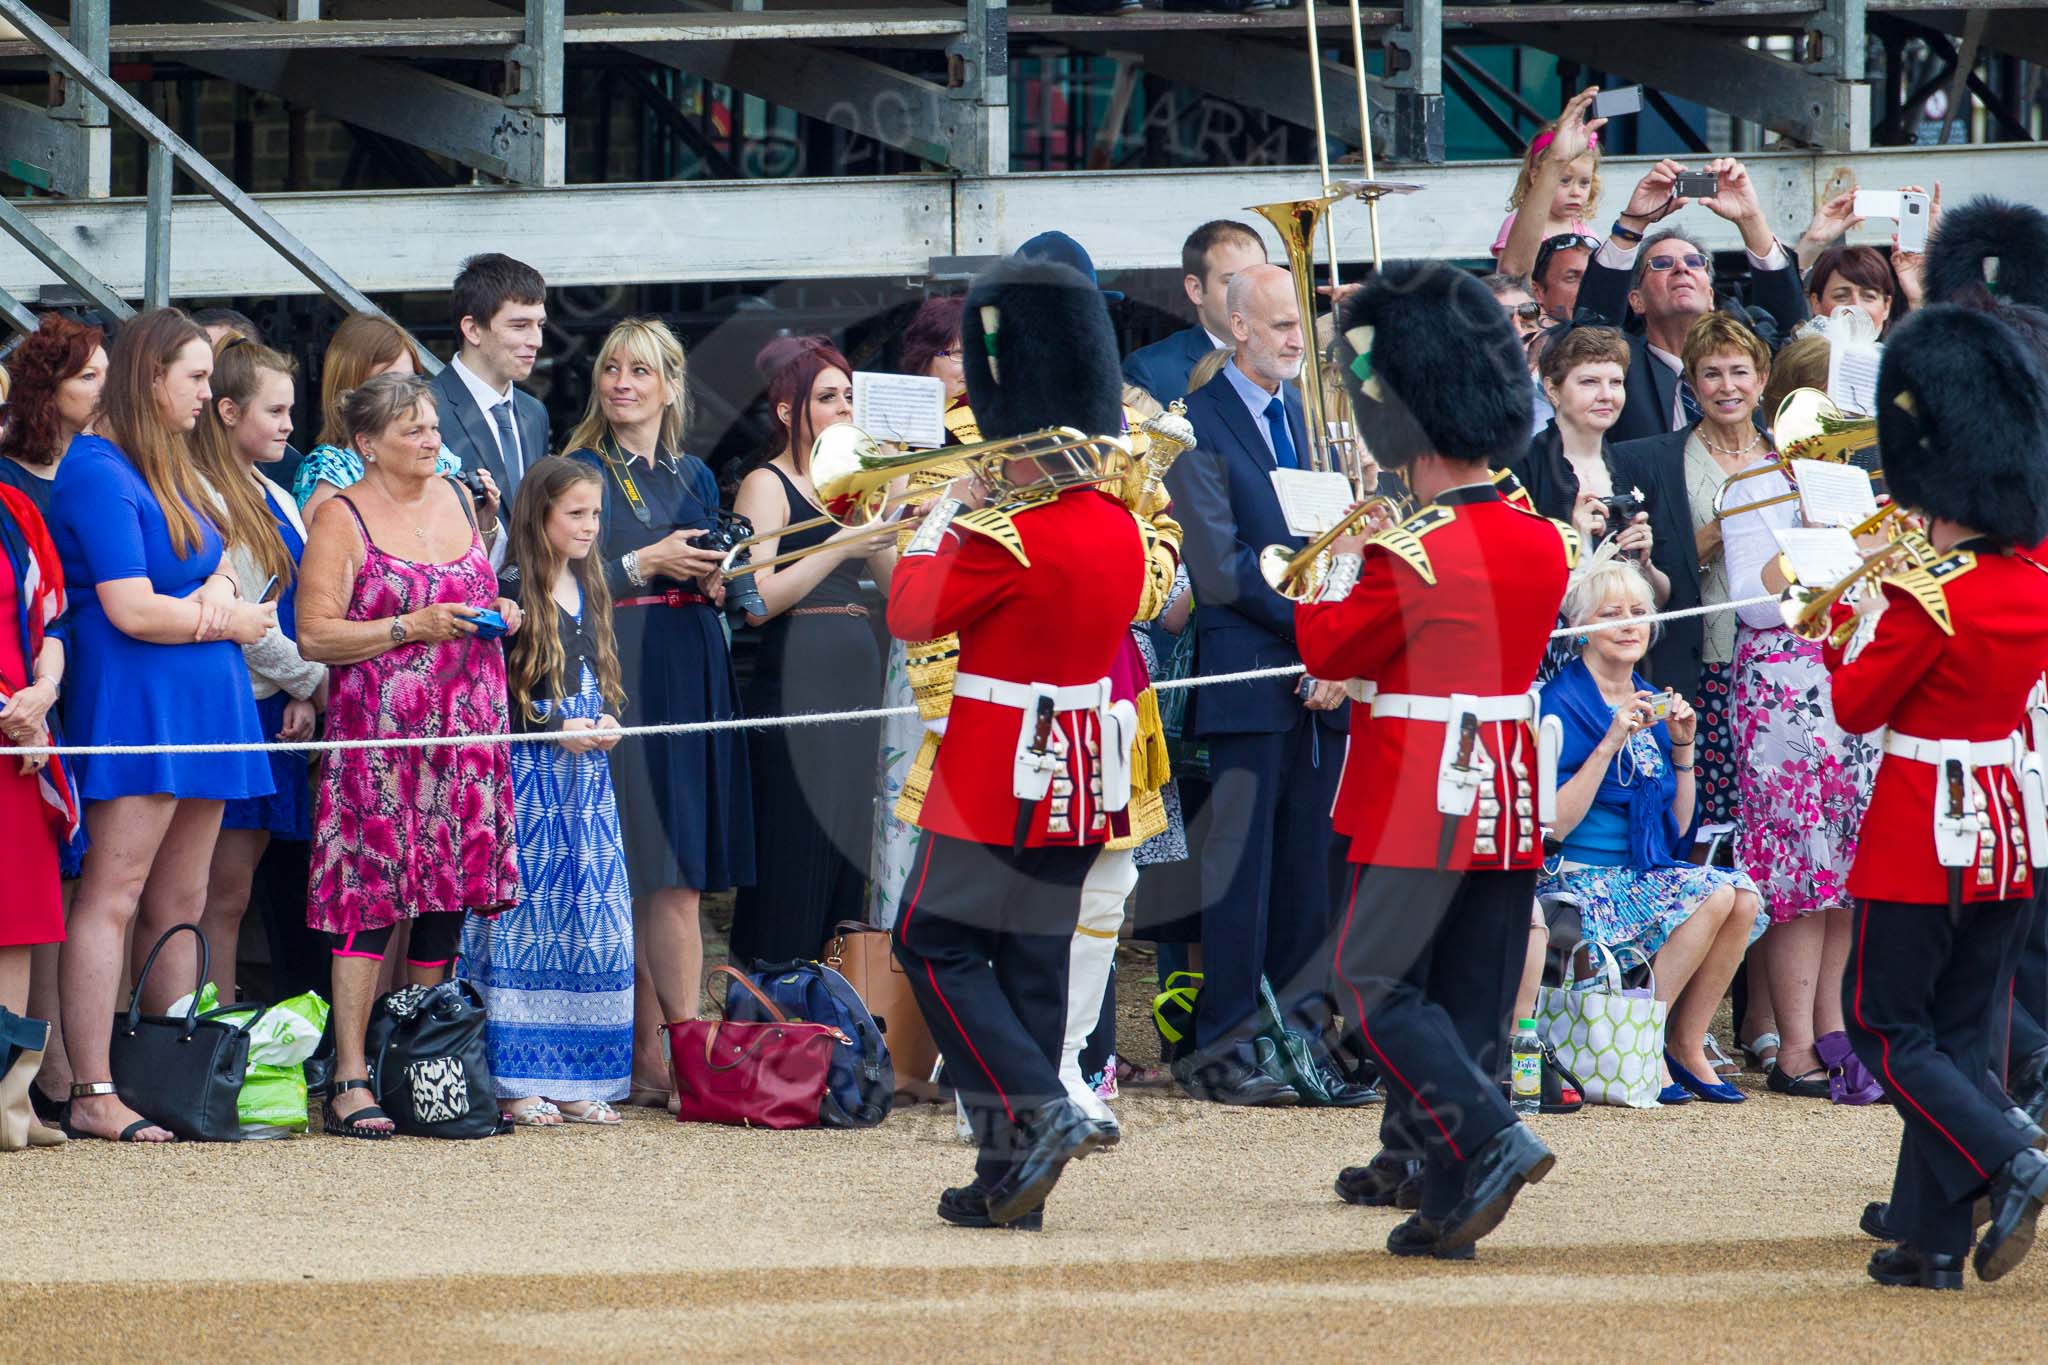 Trooping the Colour 2014.
Horse Guards Parade, Westminster,
London SW1A,

United Kingdom,
on 14 June 2014 at 10:13, image #83